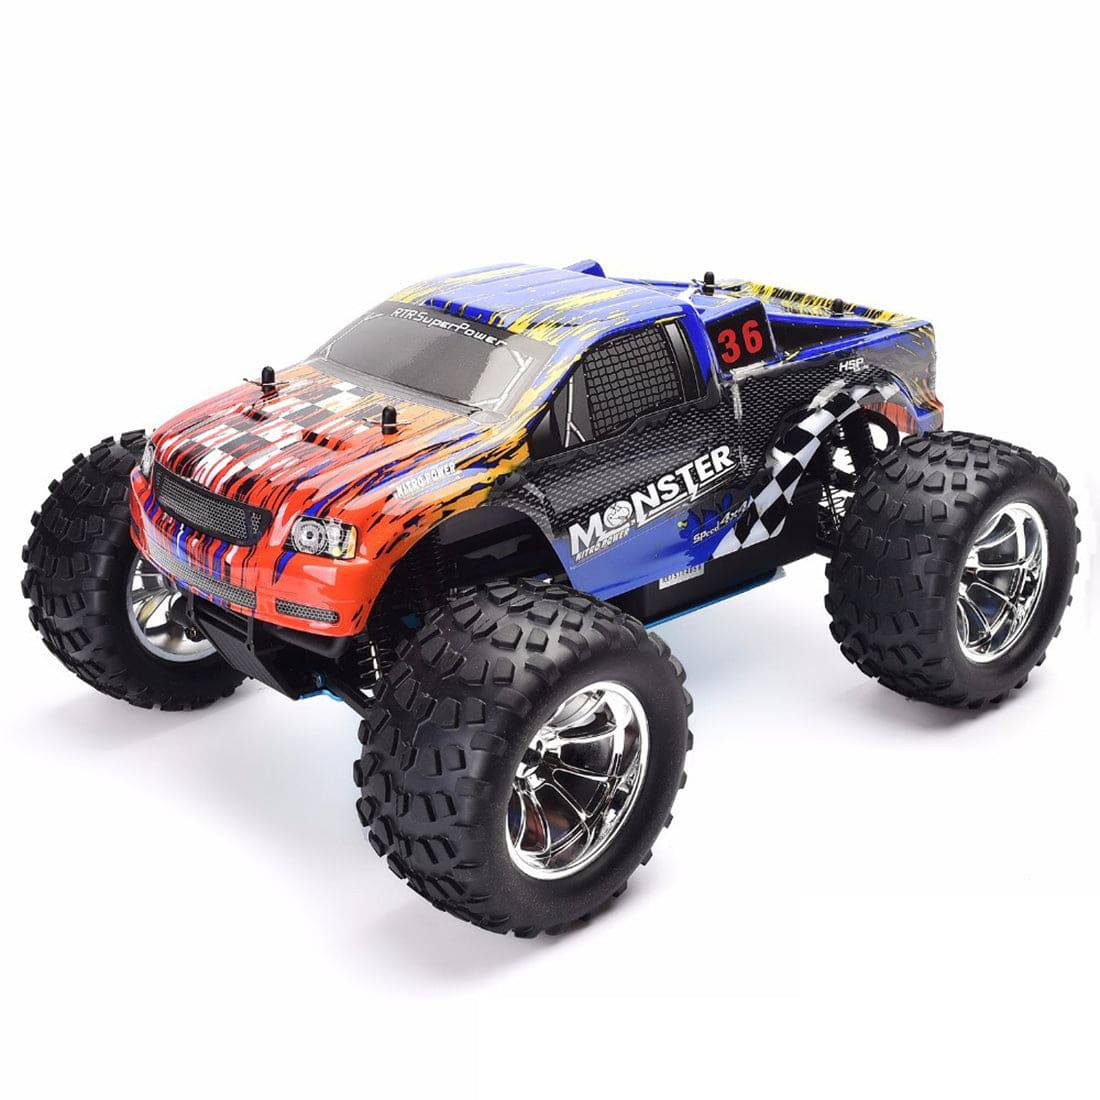 HSP 94188 1/10 RC Remote Control Nitro Gas Powered Monster Truck 4WD W/VX18 Engine 1